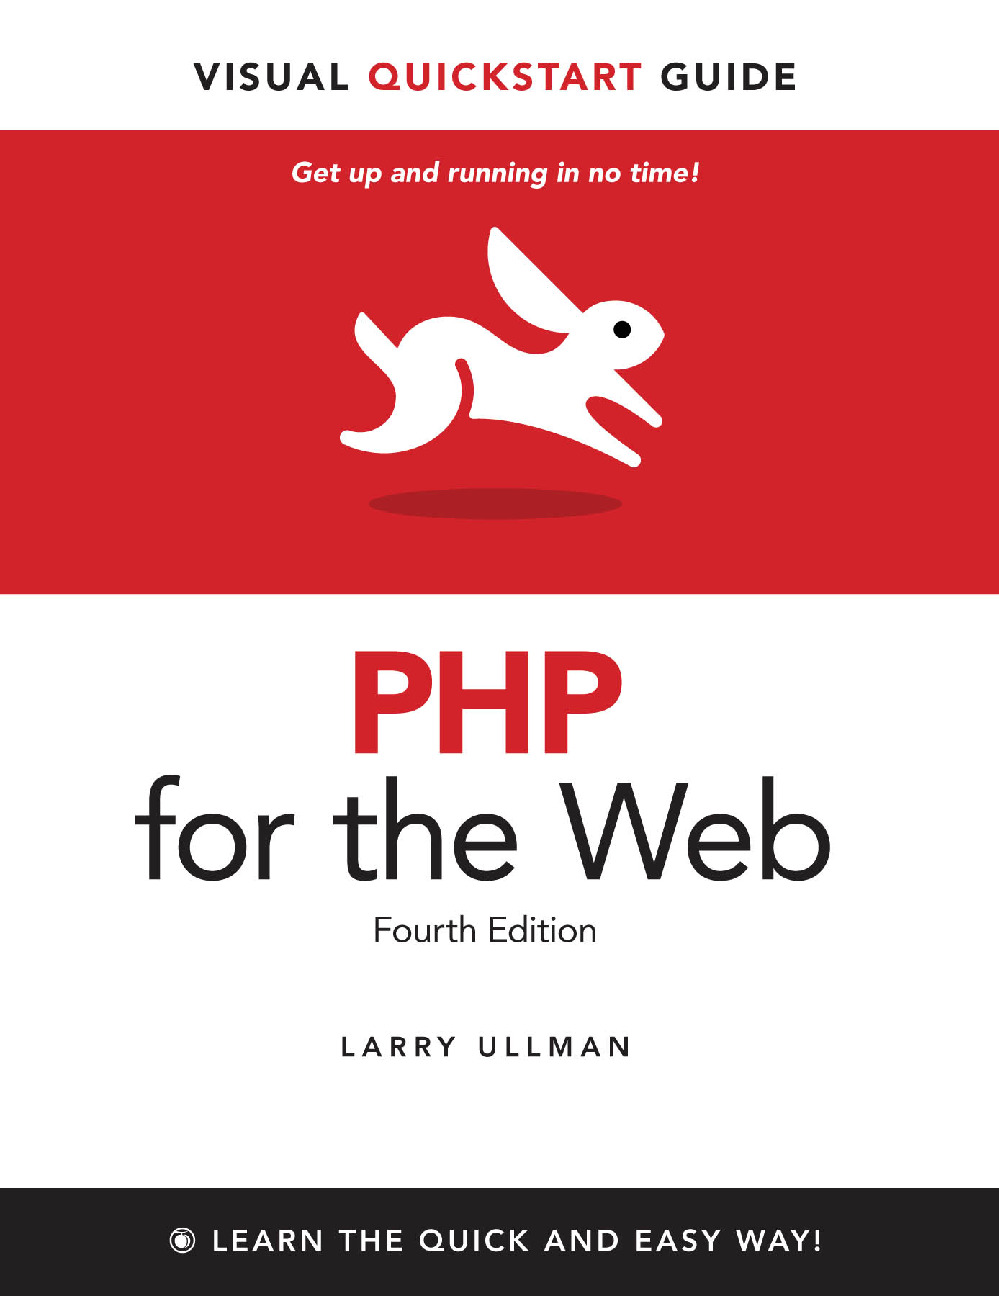 php-for-the-web-visual-quickstart-guide-4th-edition2011bbs